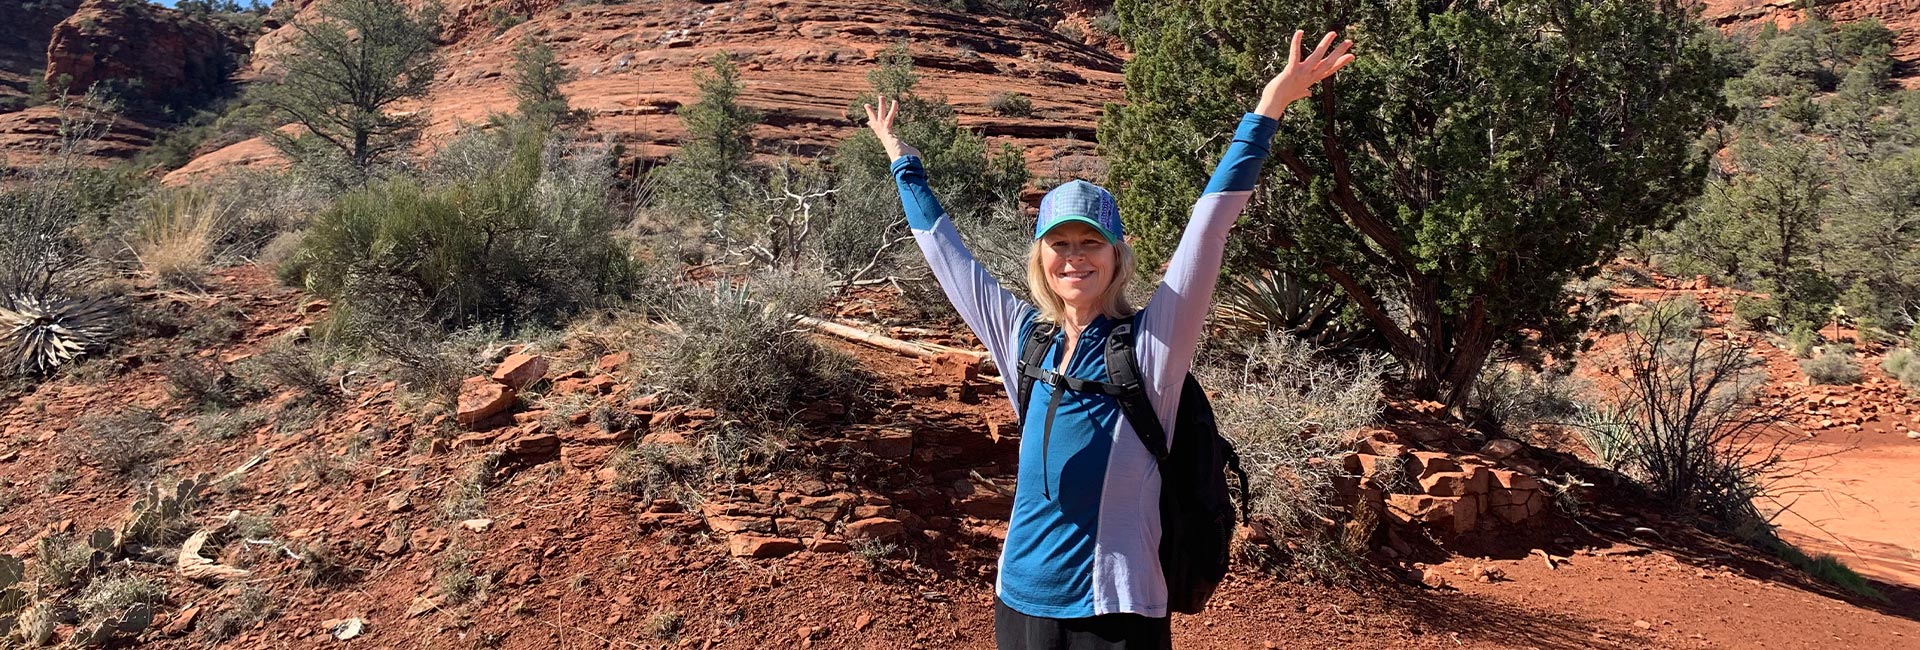 A woman celebrates a hike at Red Rocks in Sedona, a milestone in her recovery from preventative bilateral mastectomy surgery